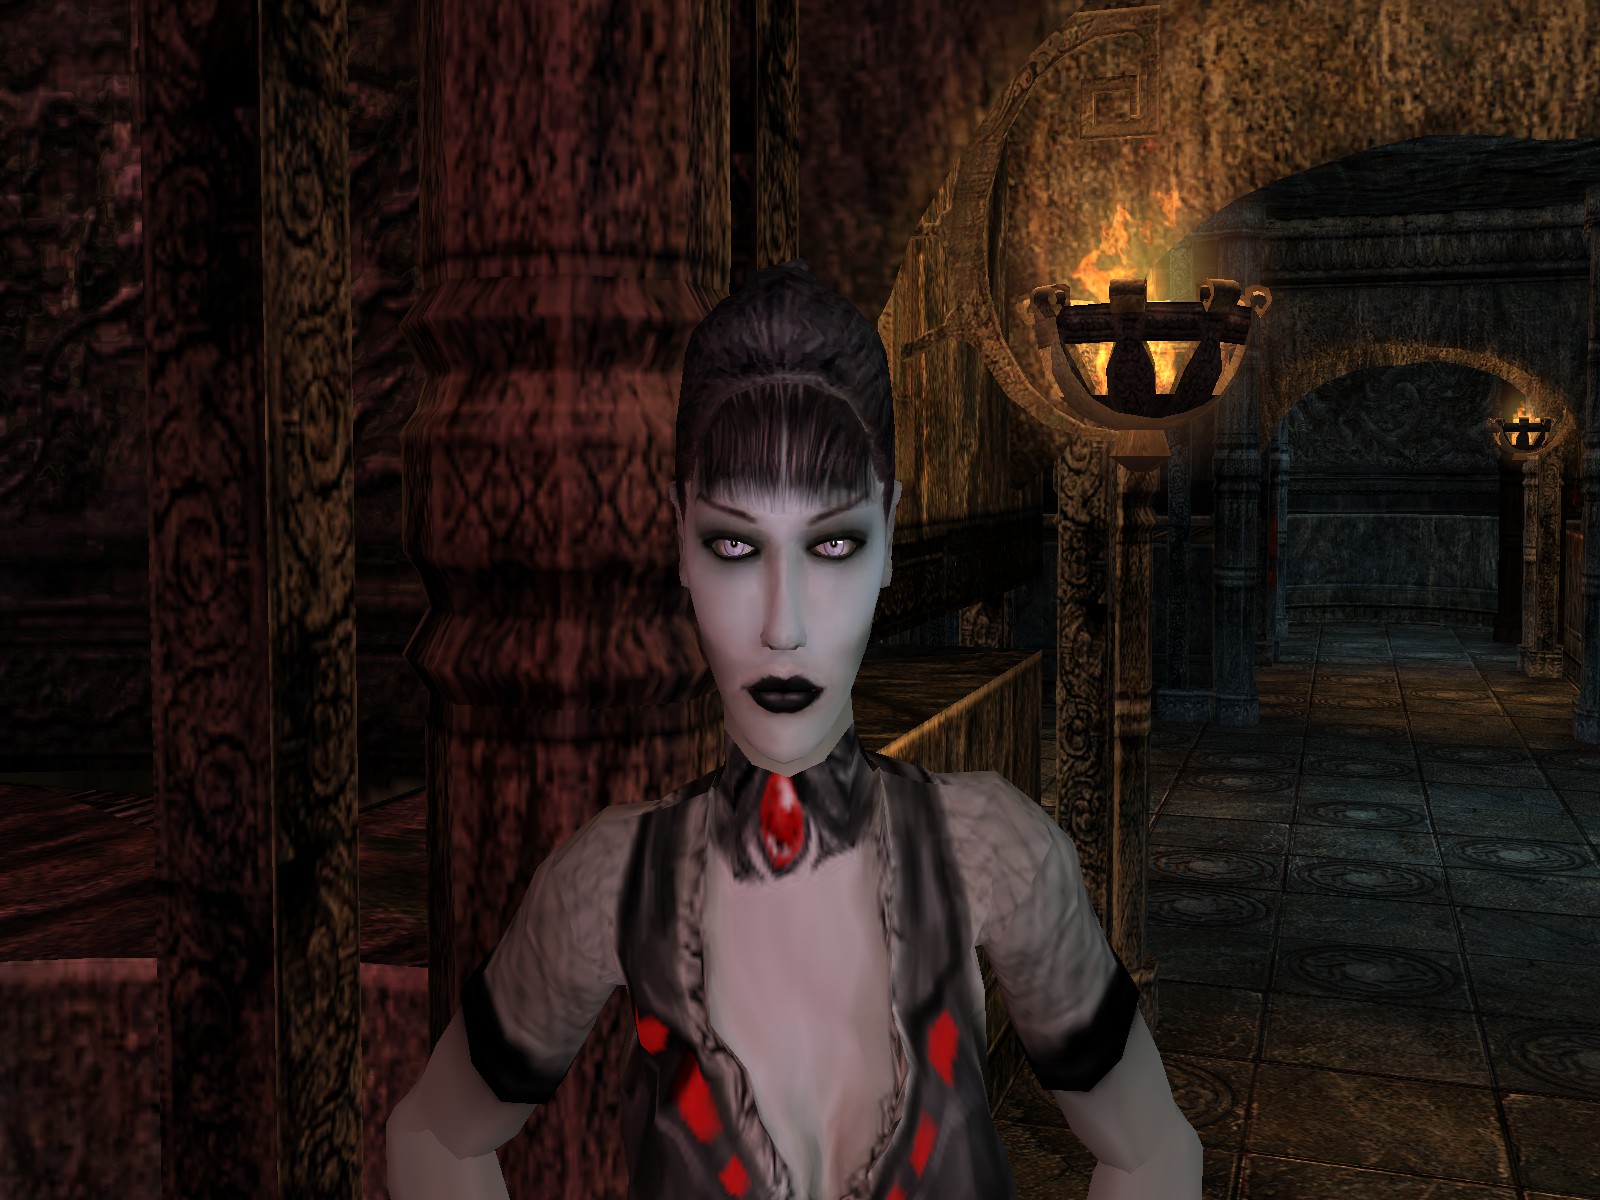 Malkavian Maze green room image - Vampire: The Masquerade - Bloodlines  Unofficial Patch mod for Vampire: The Masquerade – Bloodlines - Mod DB